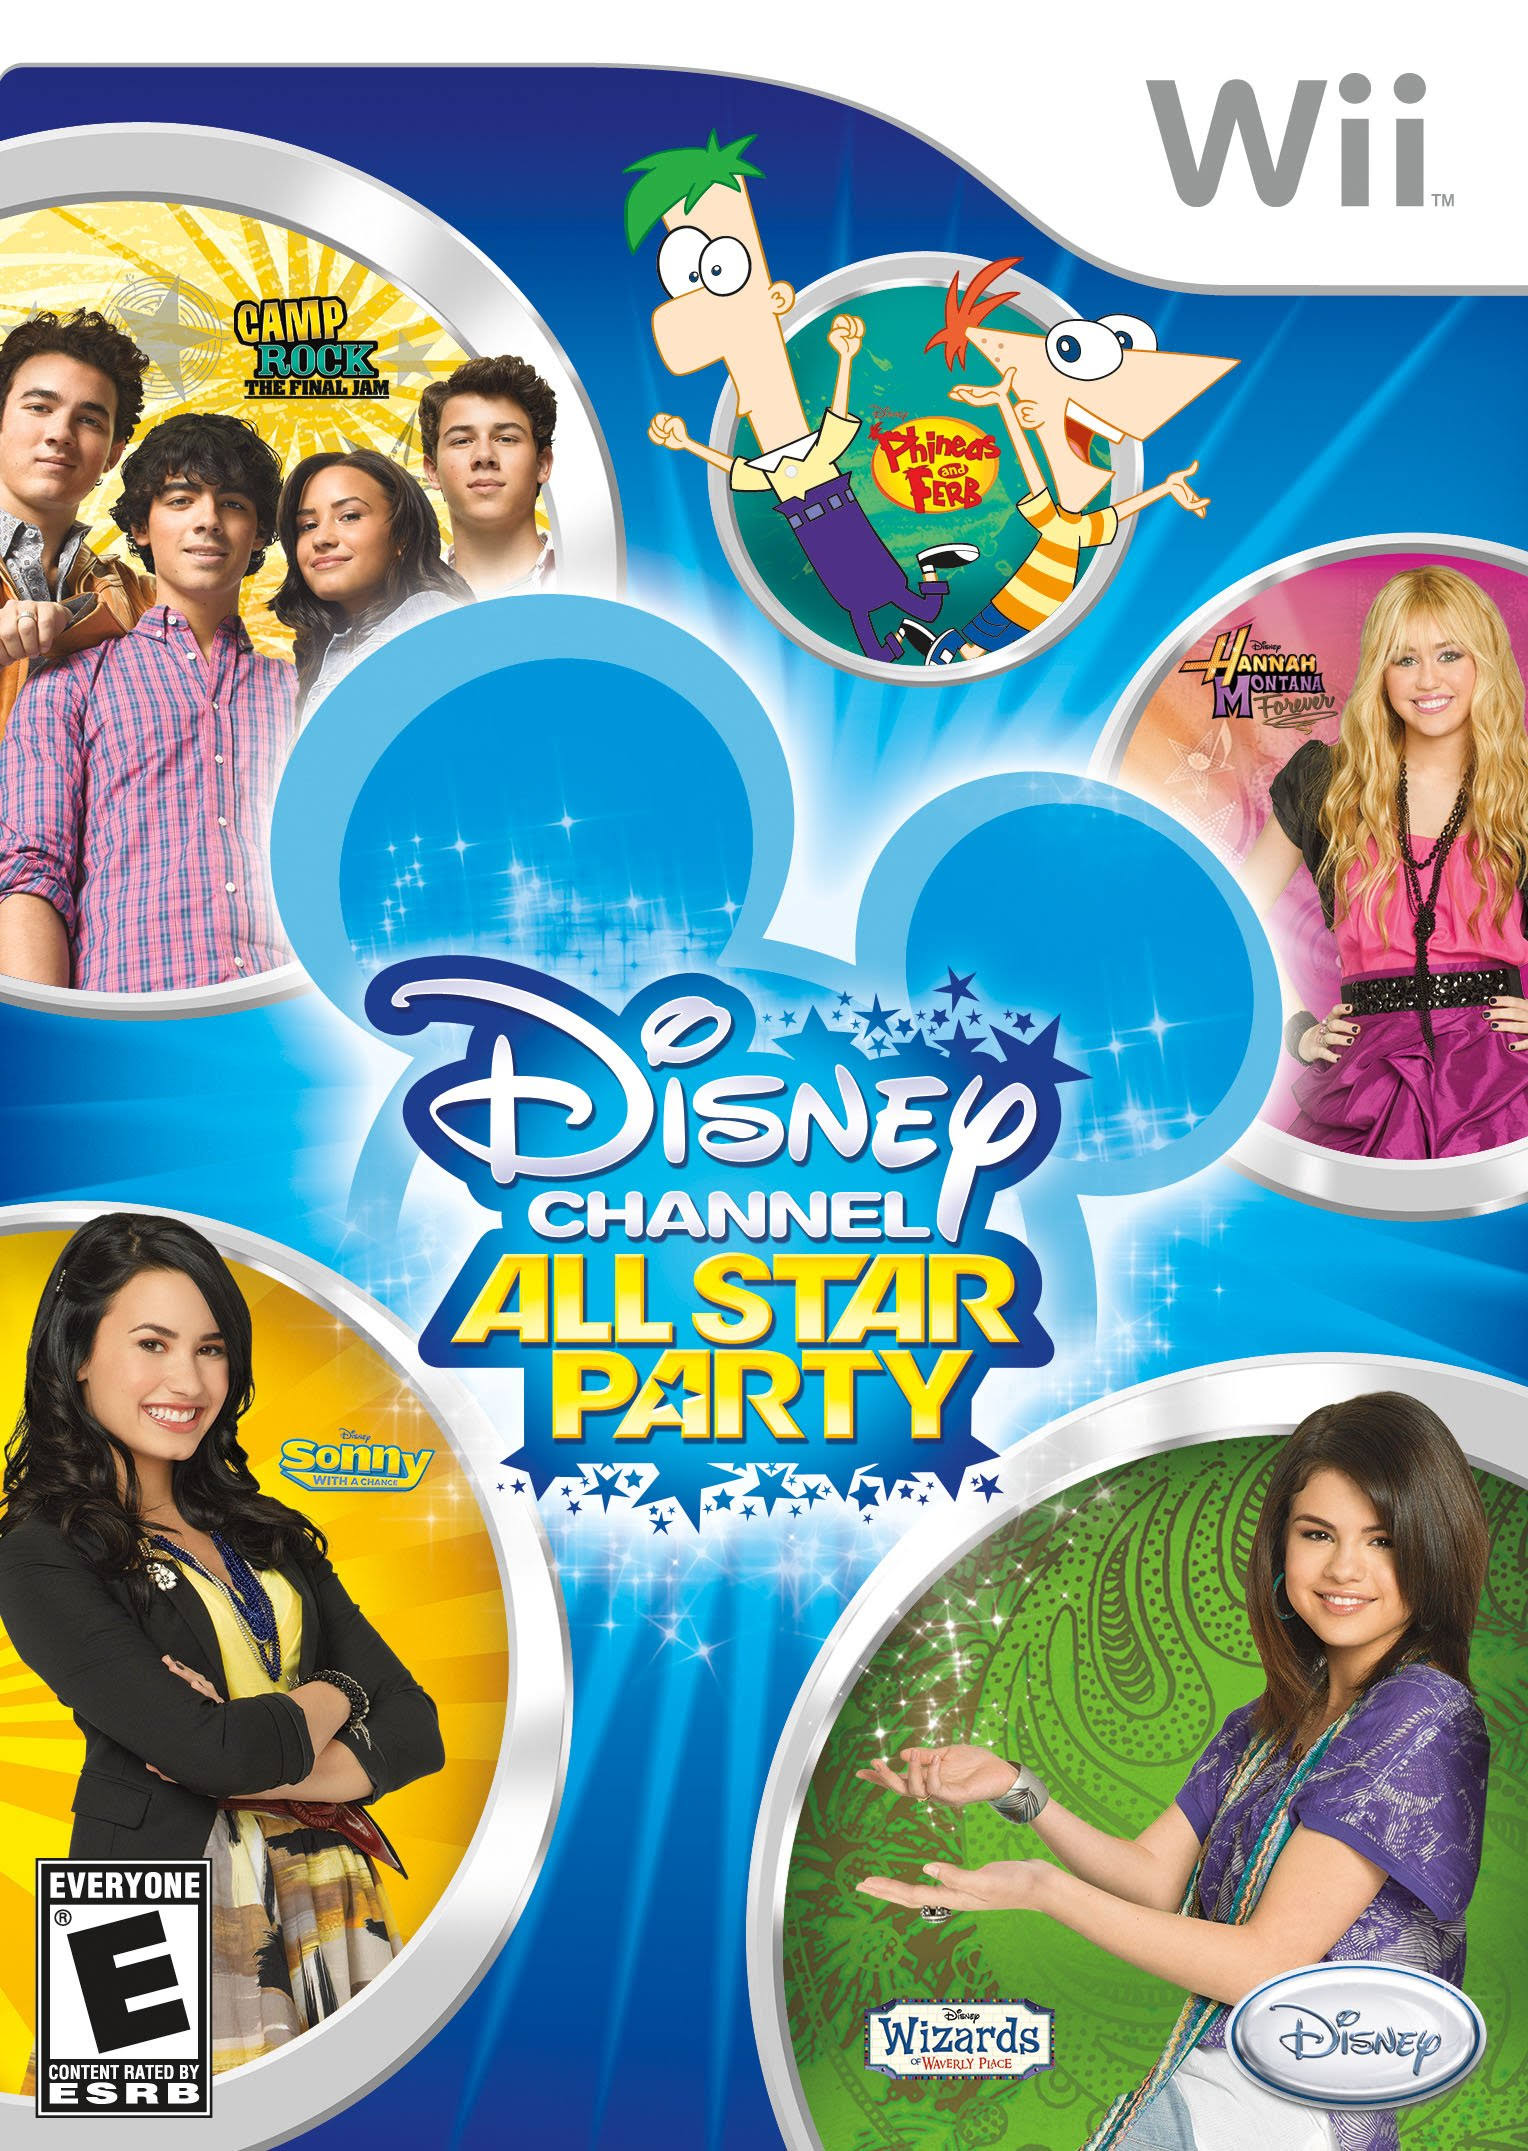 Disney Channel All Star Party - Wii